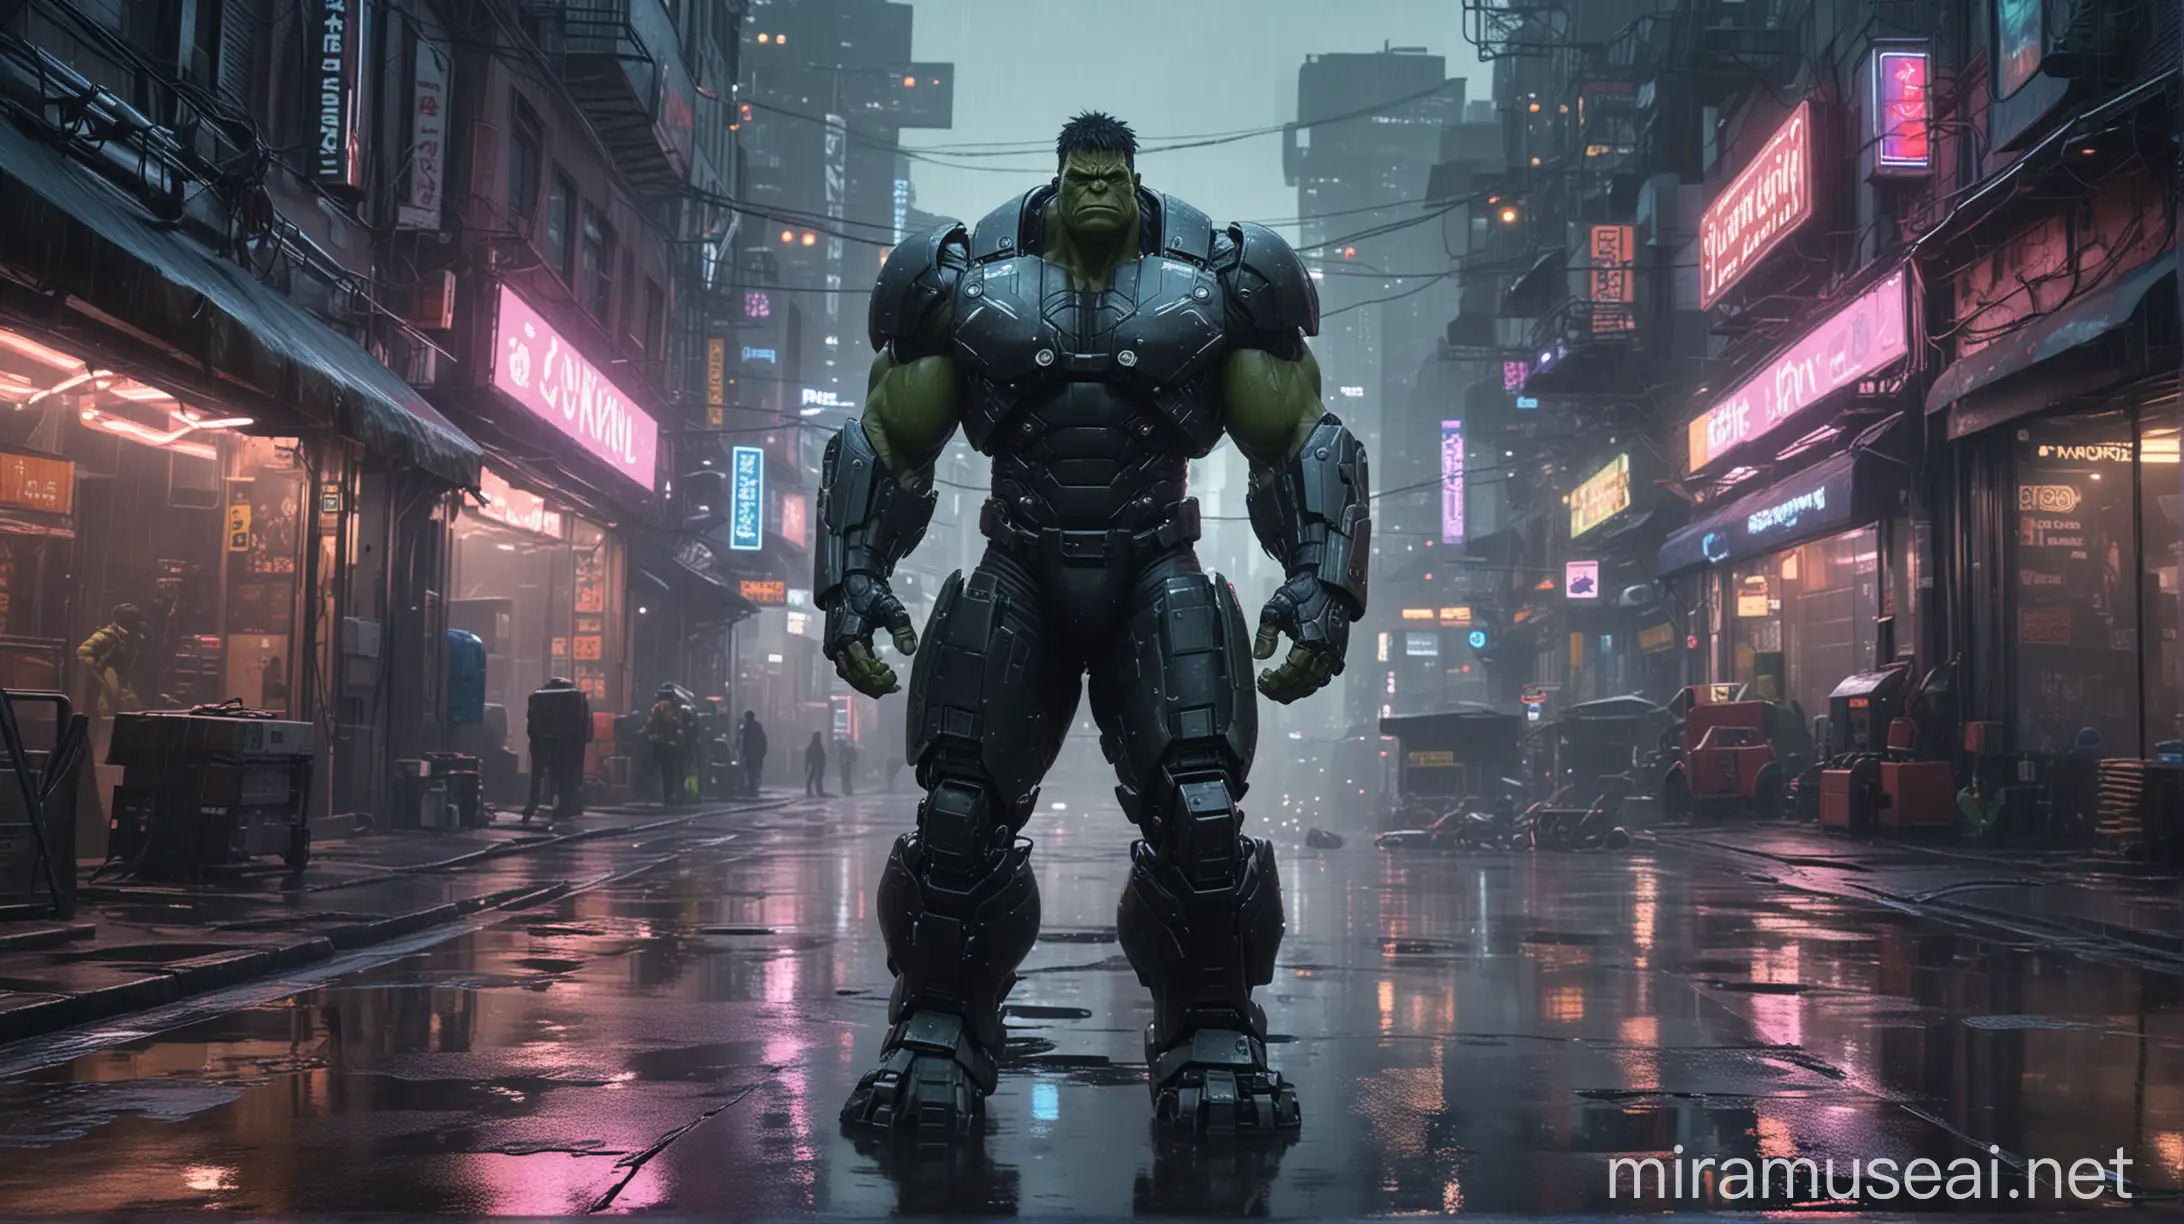 In the style of Brom art, image with Hulk inside a mech robot suit in a ready to fight stance. Clear image. Futuristic cyber punk city with neons in the background. Rainy night. Reflections. Shadows. Ray tracing. 64K.